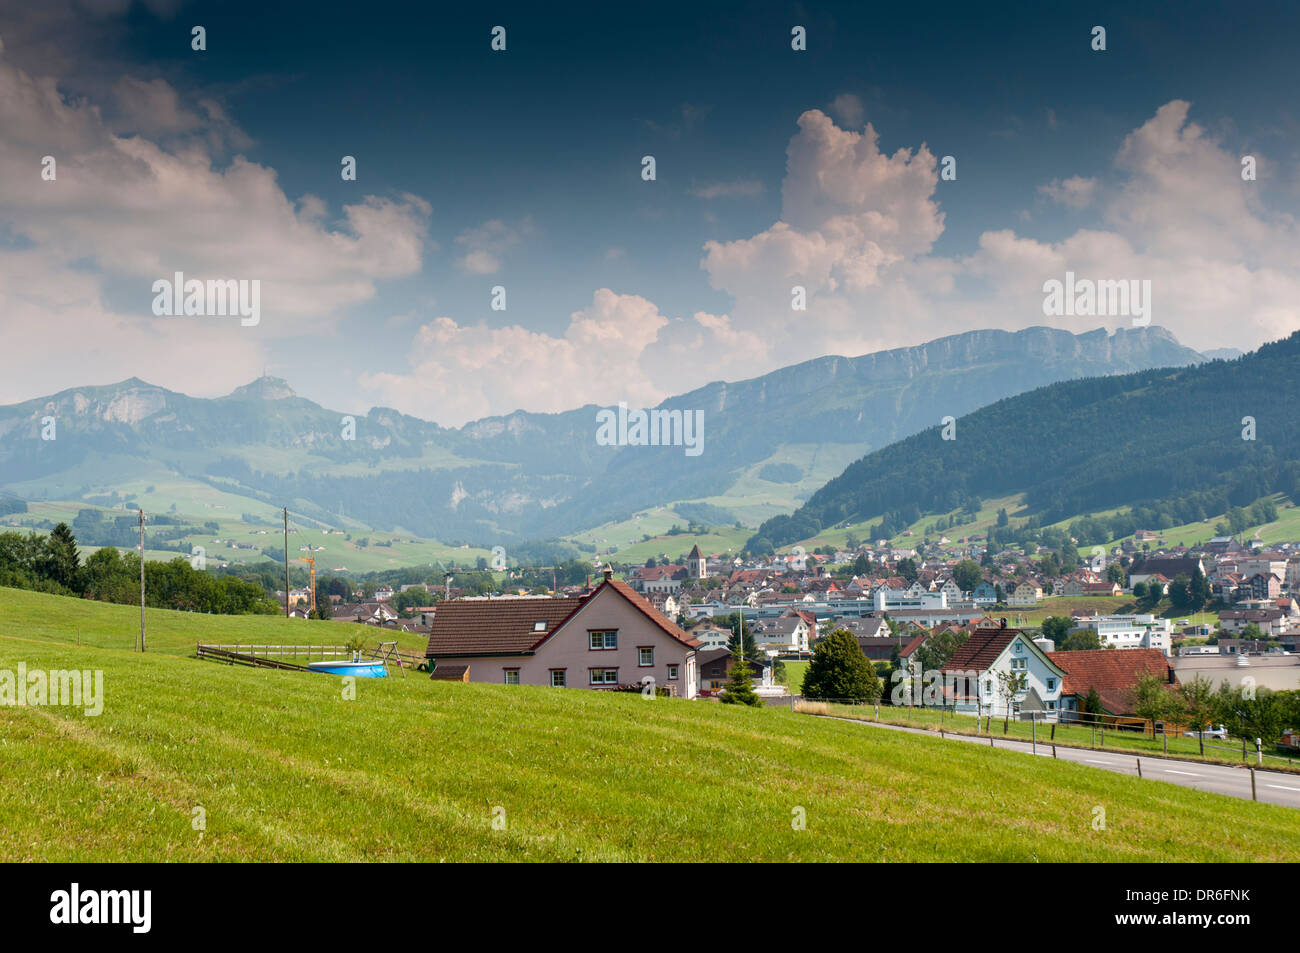 View of the town of Appenzell in Appenzellerland, Switzerland Stock Photo